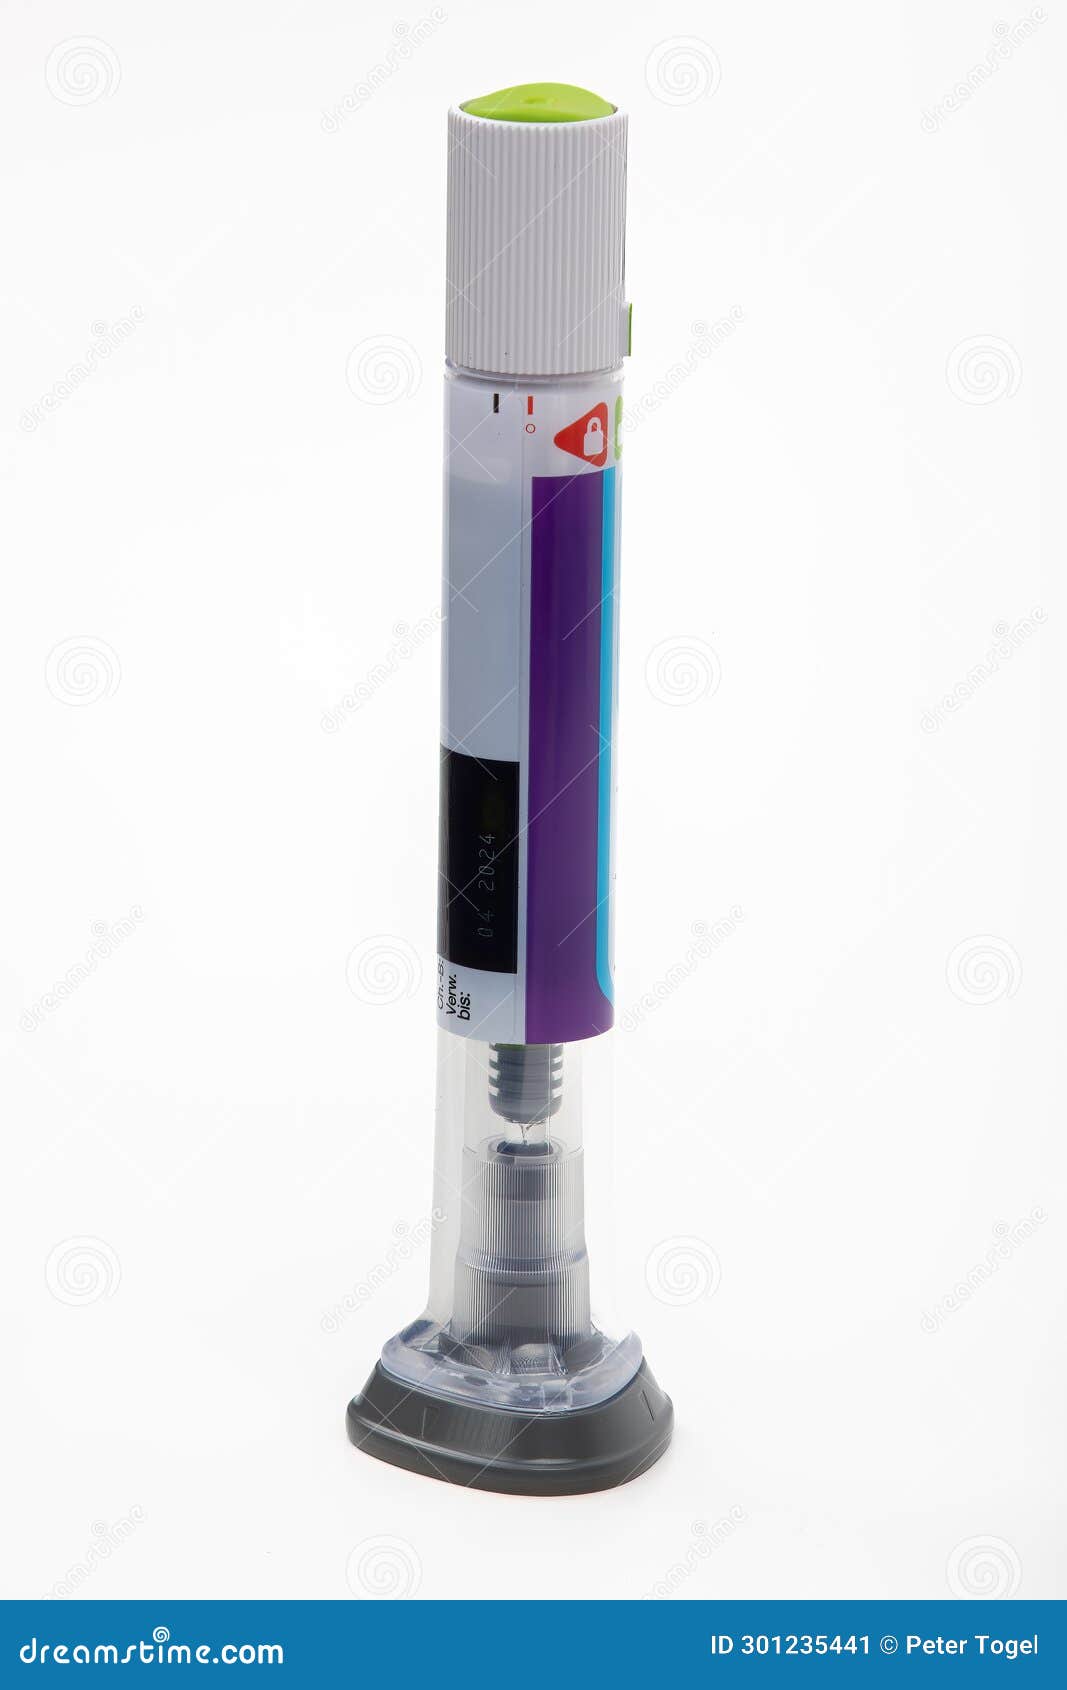 seven-day dosis pen of dulaglutide for type 2 diabetes treatment on white background